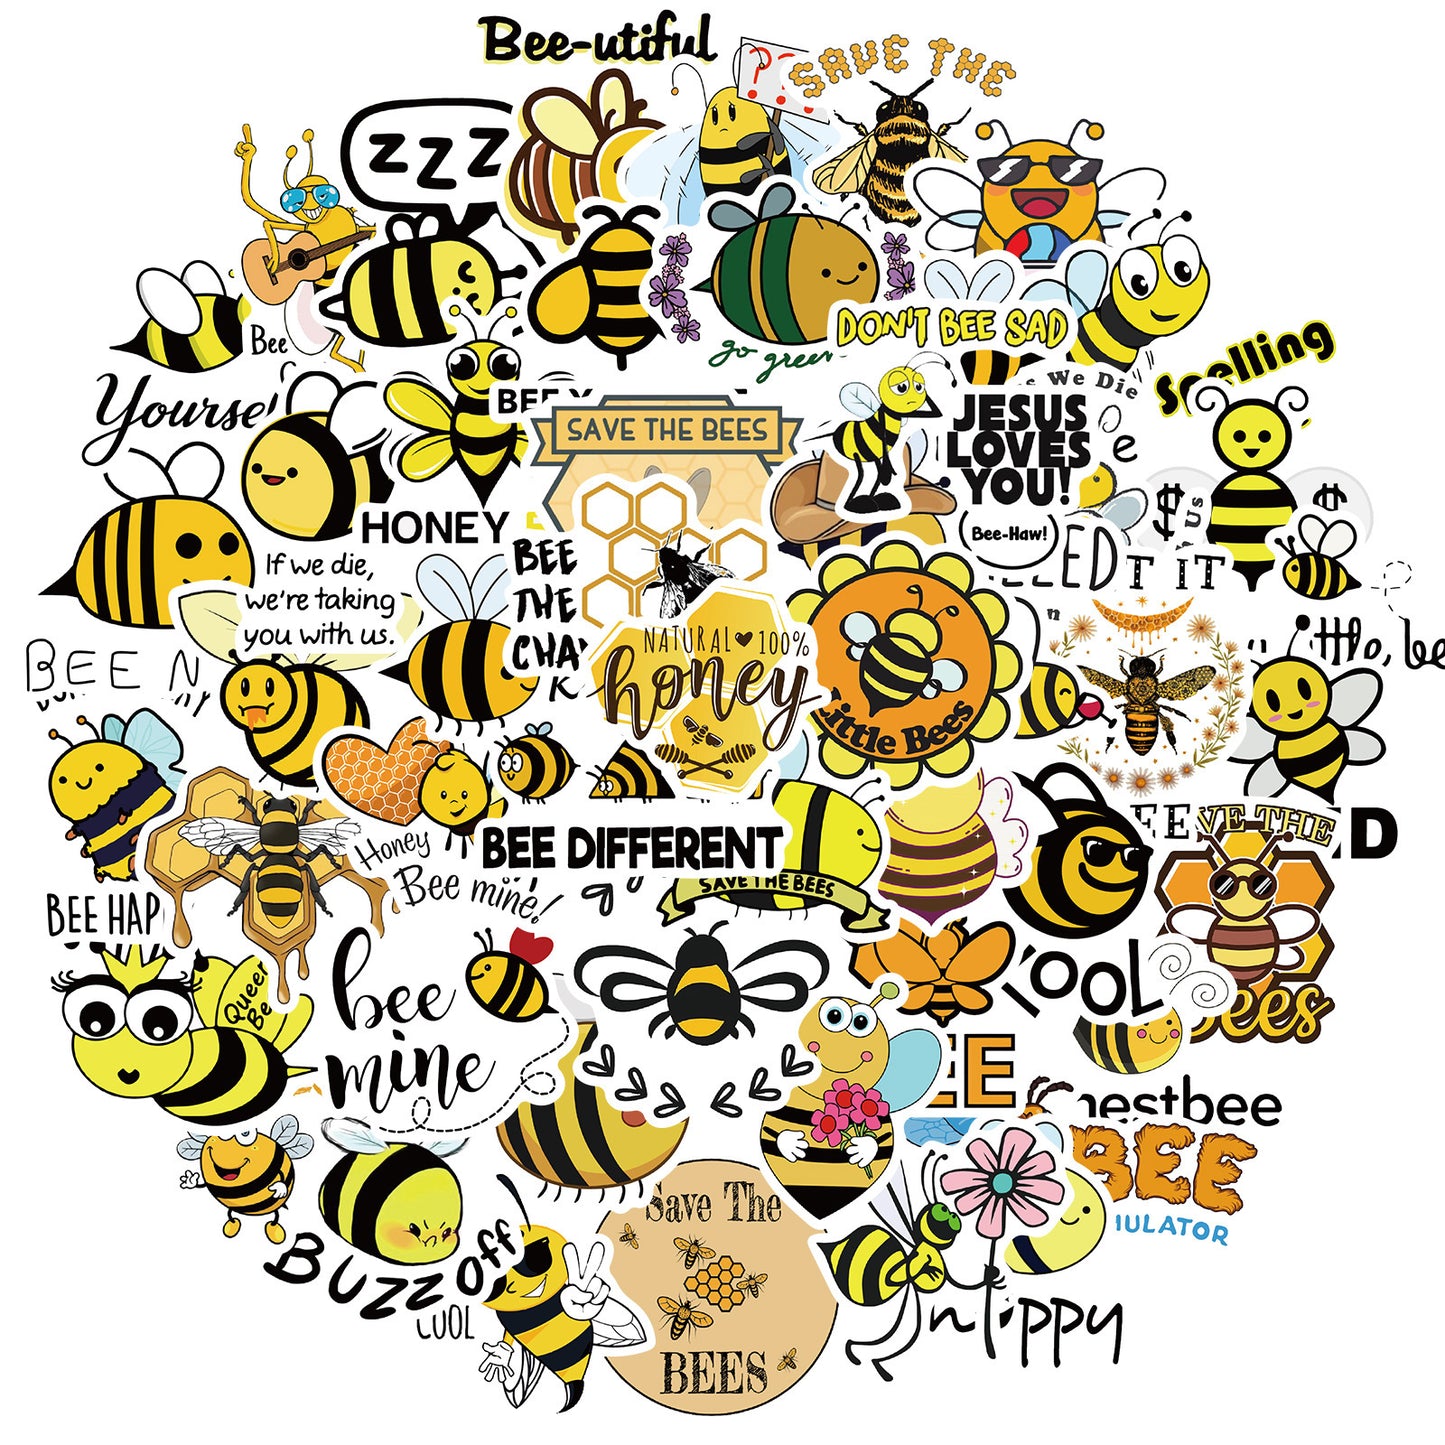 Buzz into Inspiration with 50 pcs Bee Doodle Stickers!